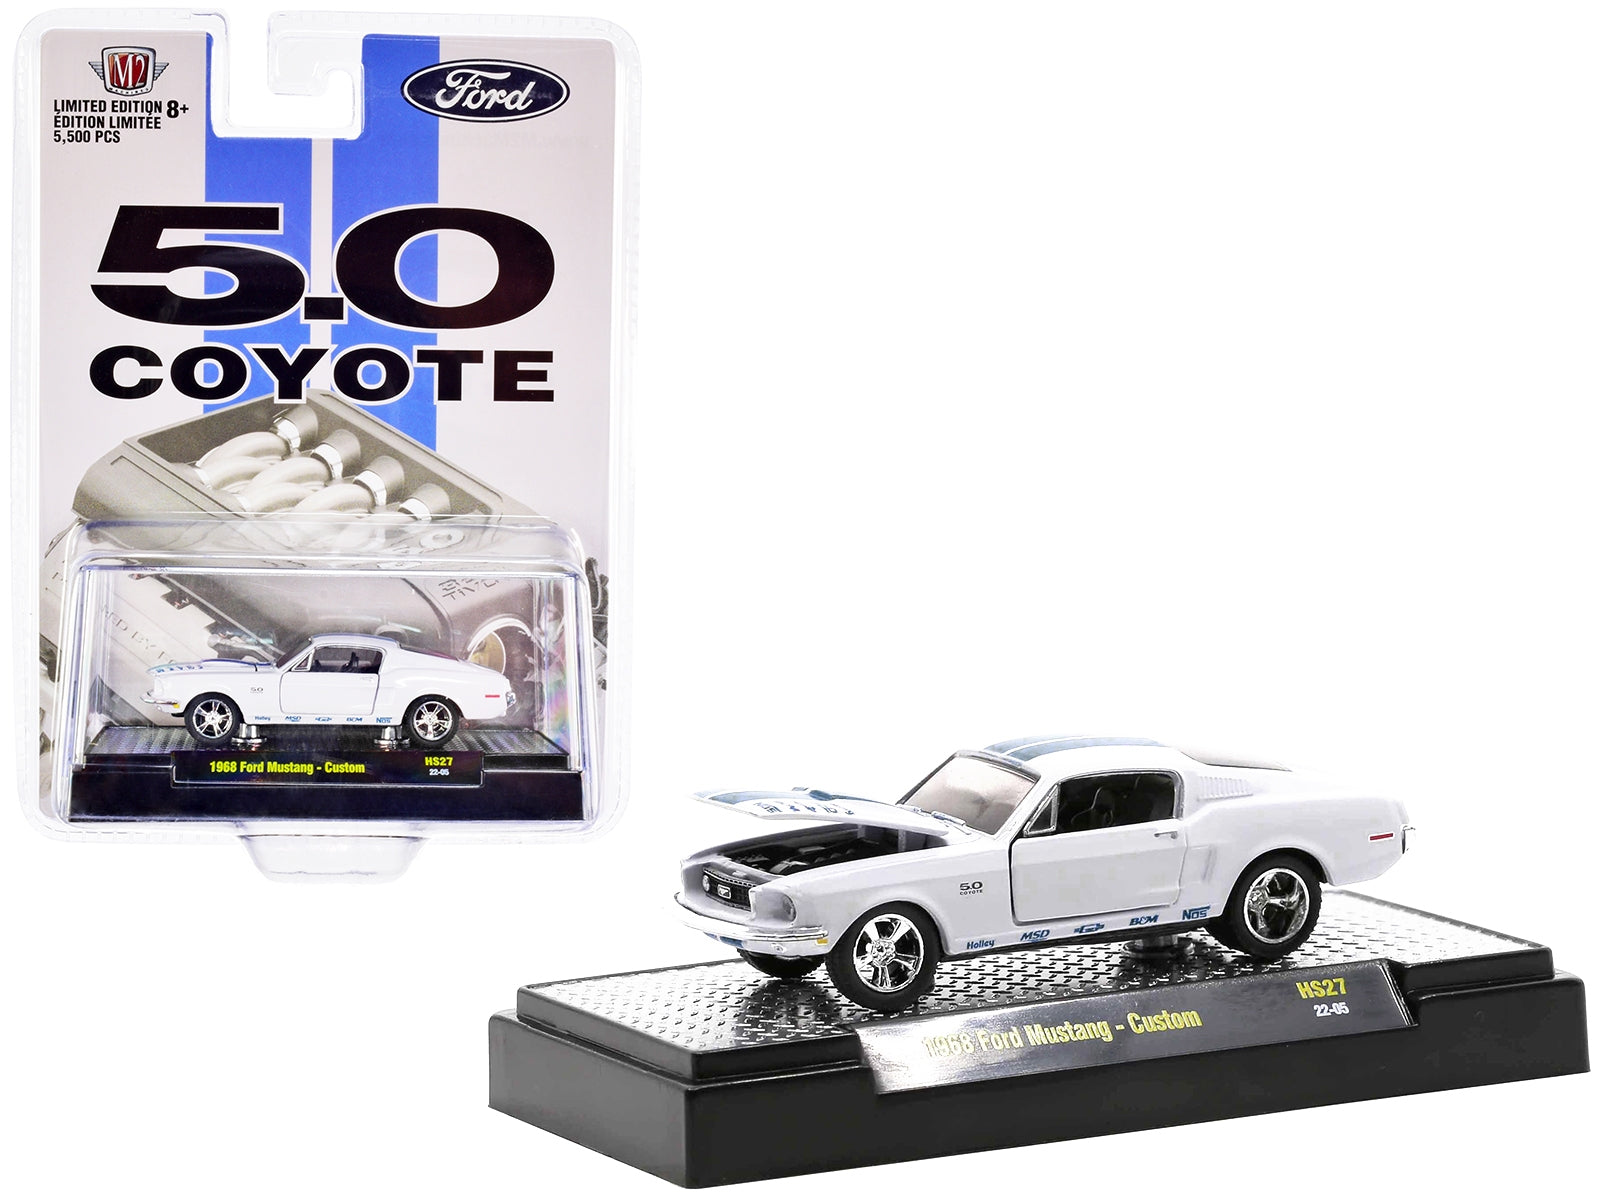 1968 Ford Mustang Custom Platinum Pearl White with Blue Stripes "5.0 Coyote" Limited Edition to 5500 pieces Worldwide 1/64 Diecast Model Car by M2 Machines